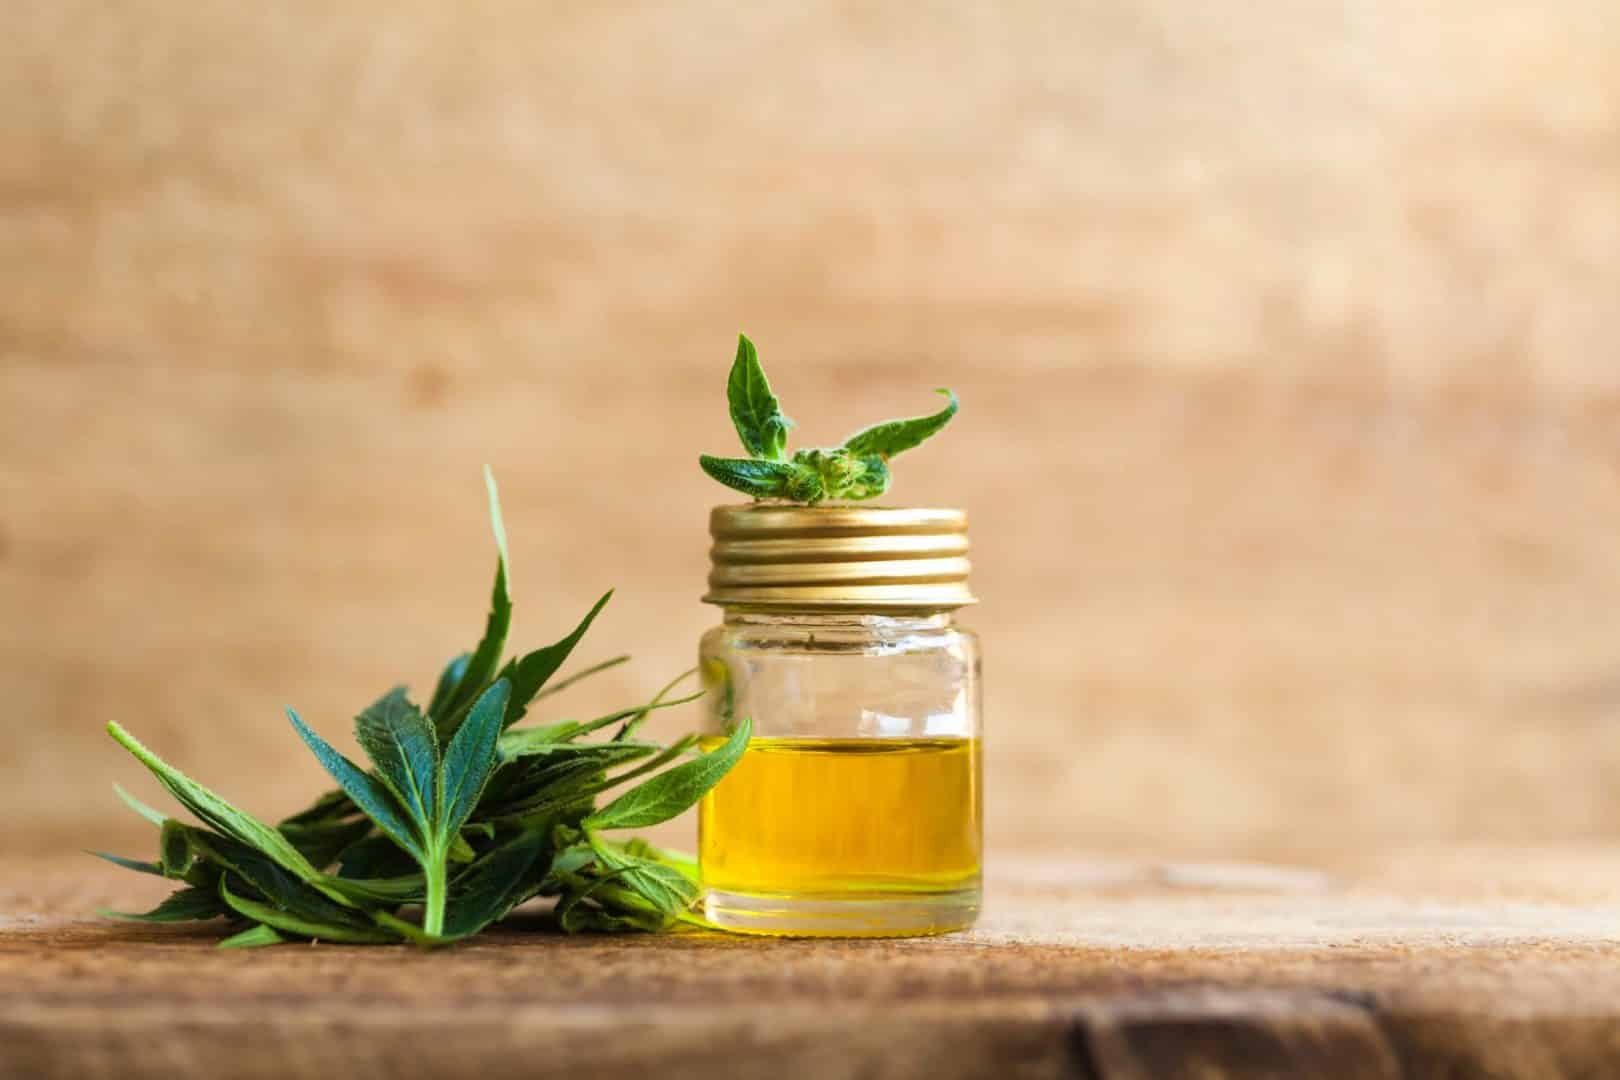 Can CBD Help Treat Cancer Side Effects? by Cann I Help